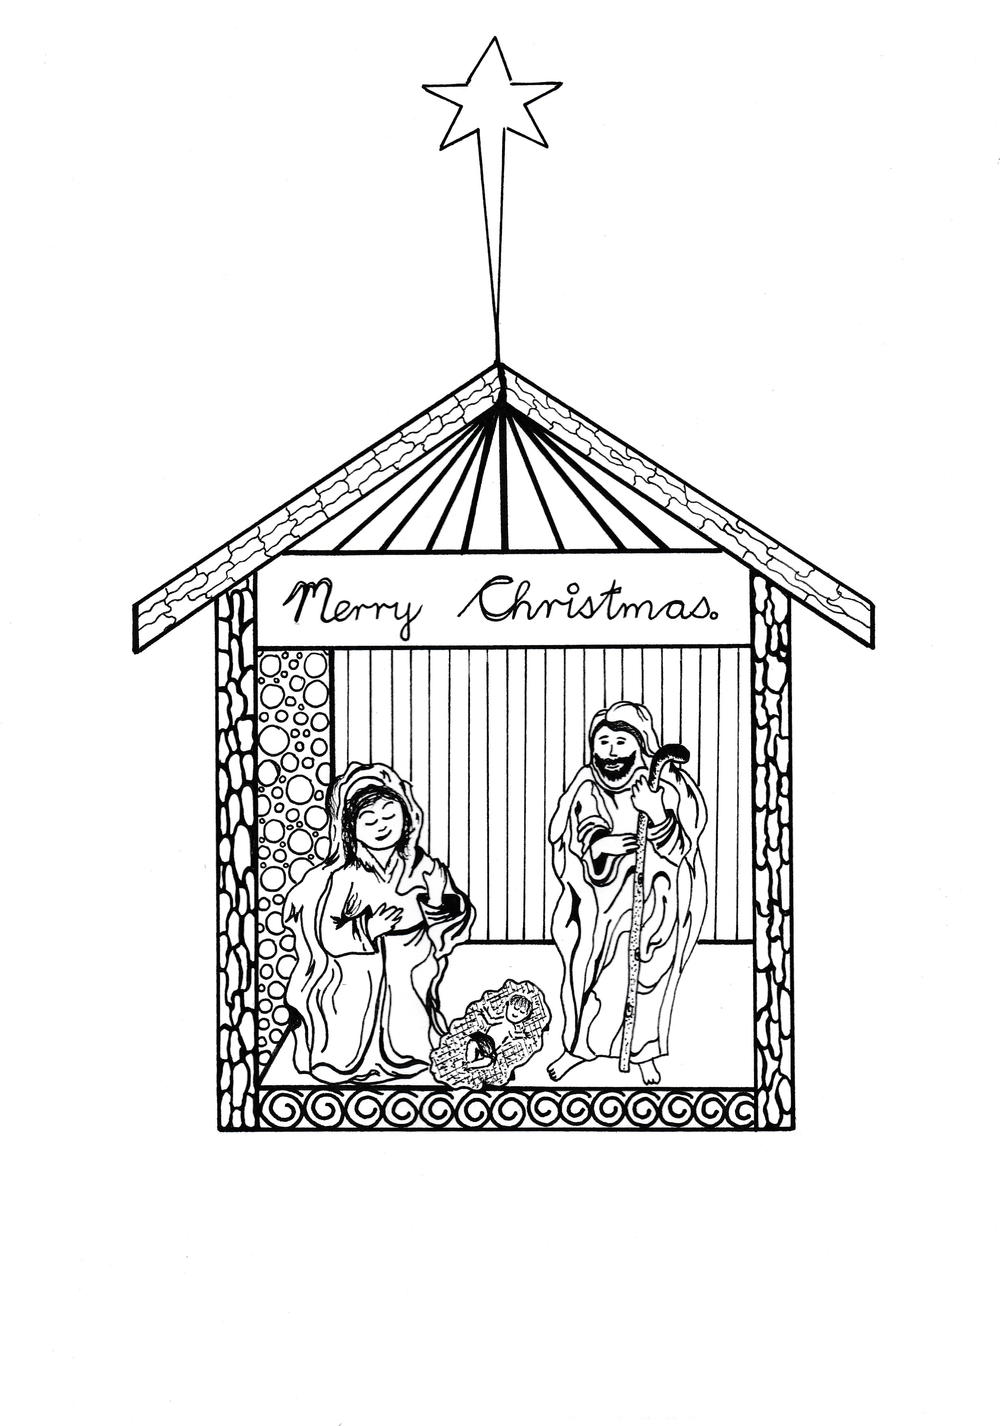 Free Printable Nativity Scene Coloring Pages | AllFreeChristmasCrafts.com